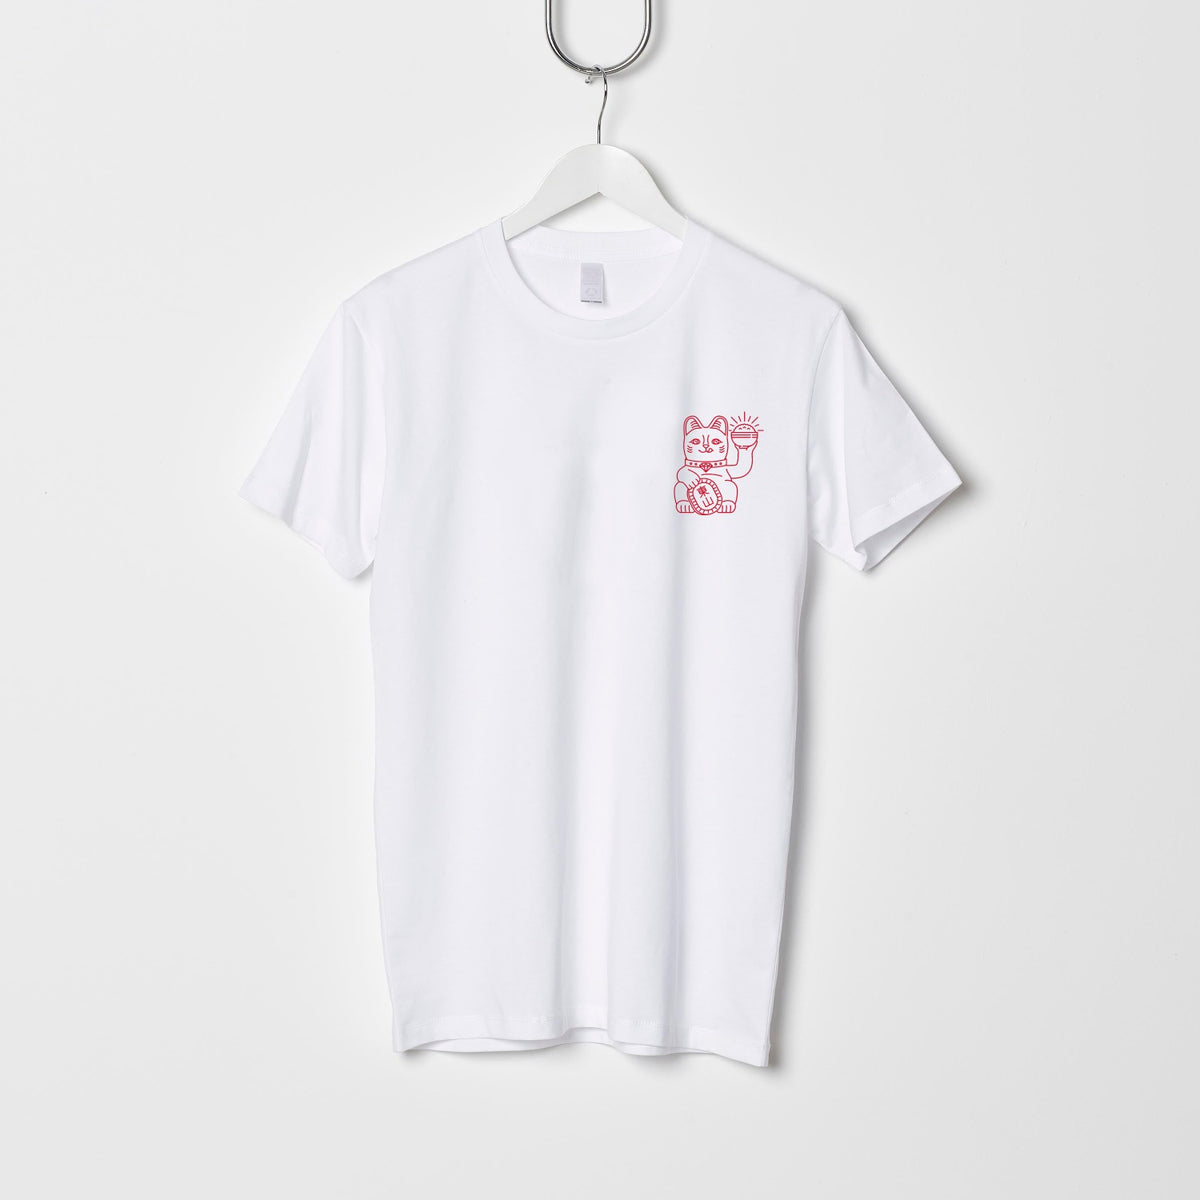 Eastern Hill General Supplies Land of the Ricing Son Tシャツ - ホワイト/レッド